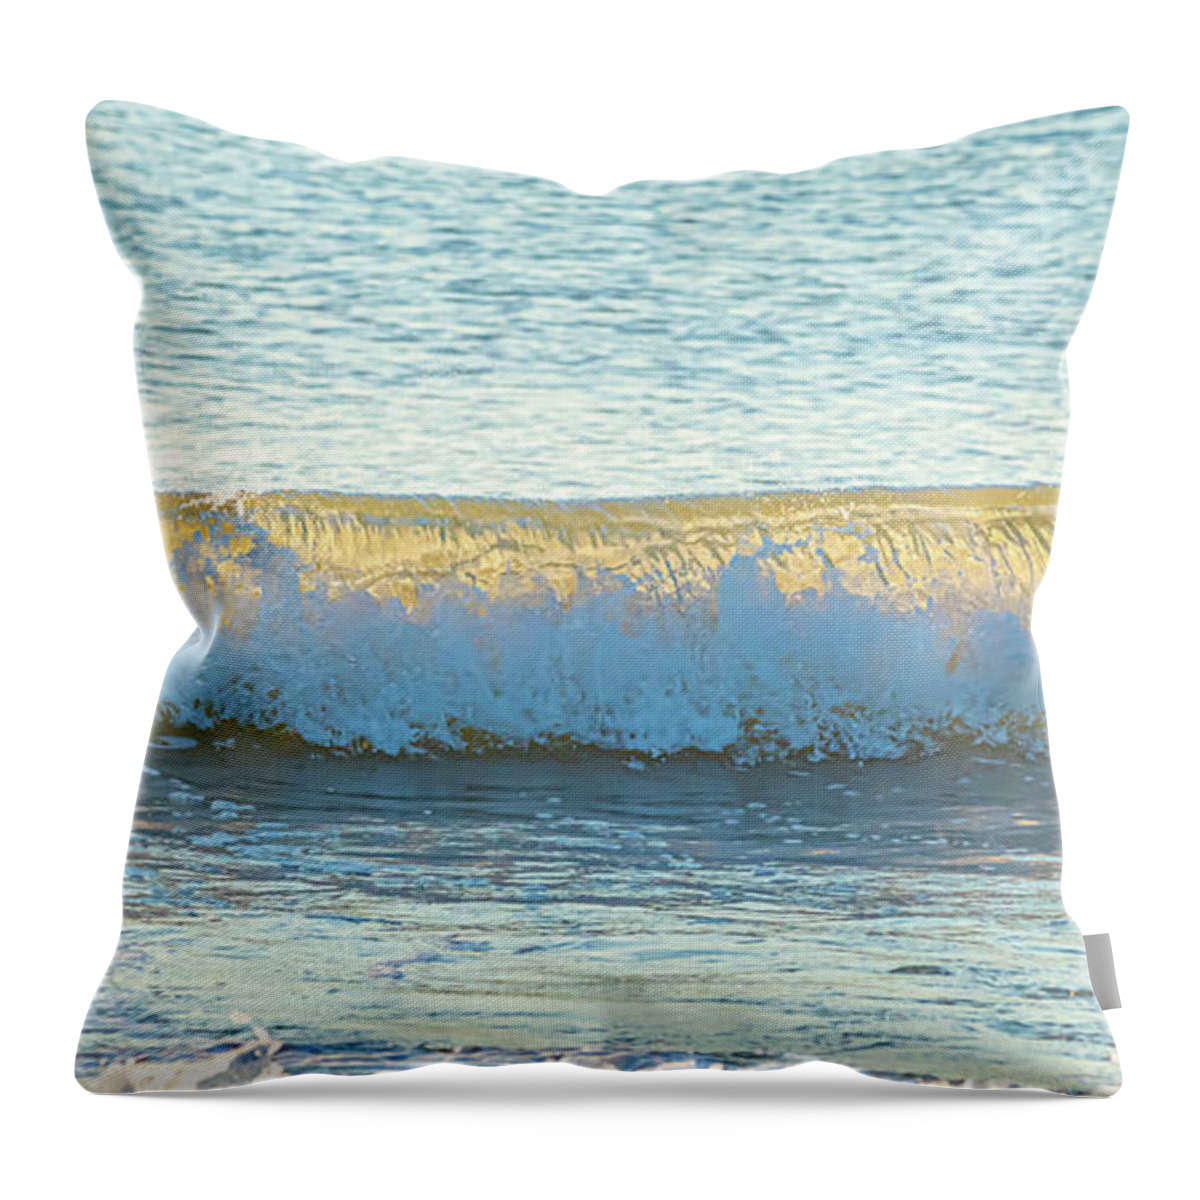 Sunrise Throw Pillow featuring the photograph Sunrise Waves by Donna Twiford